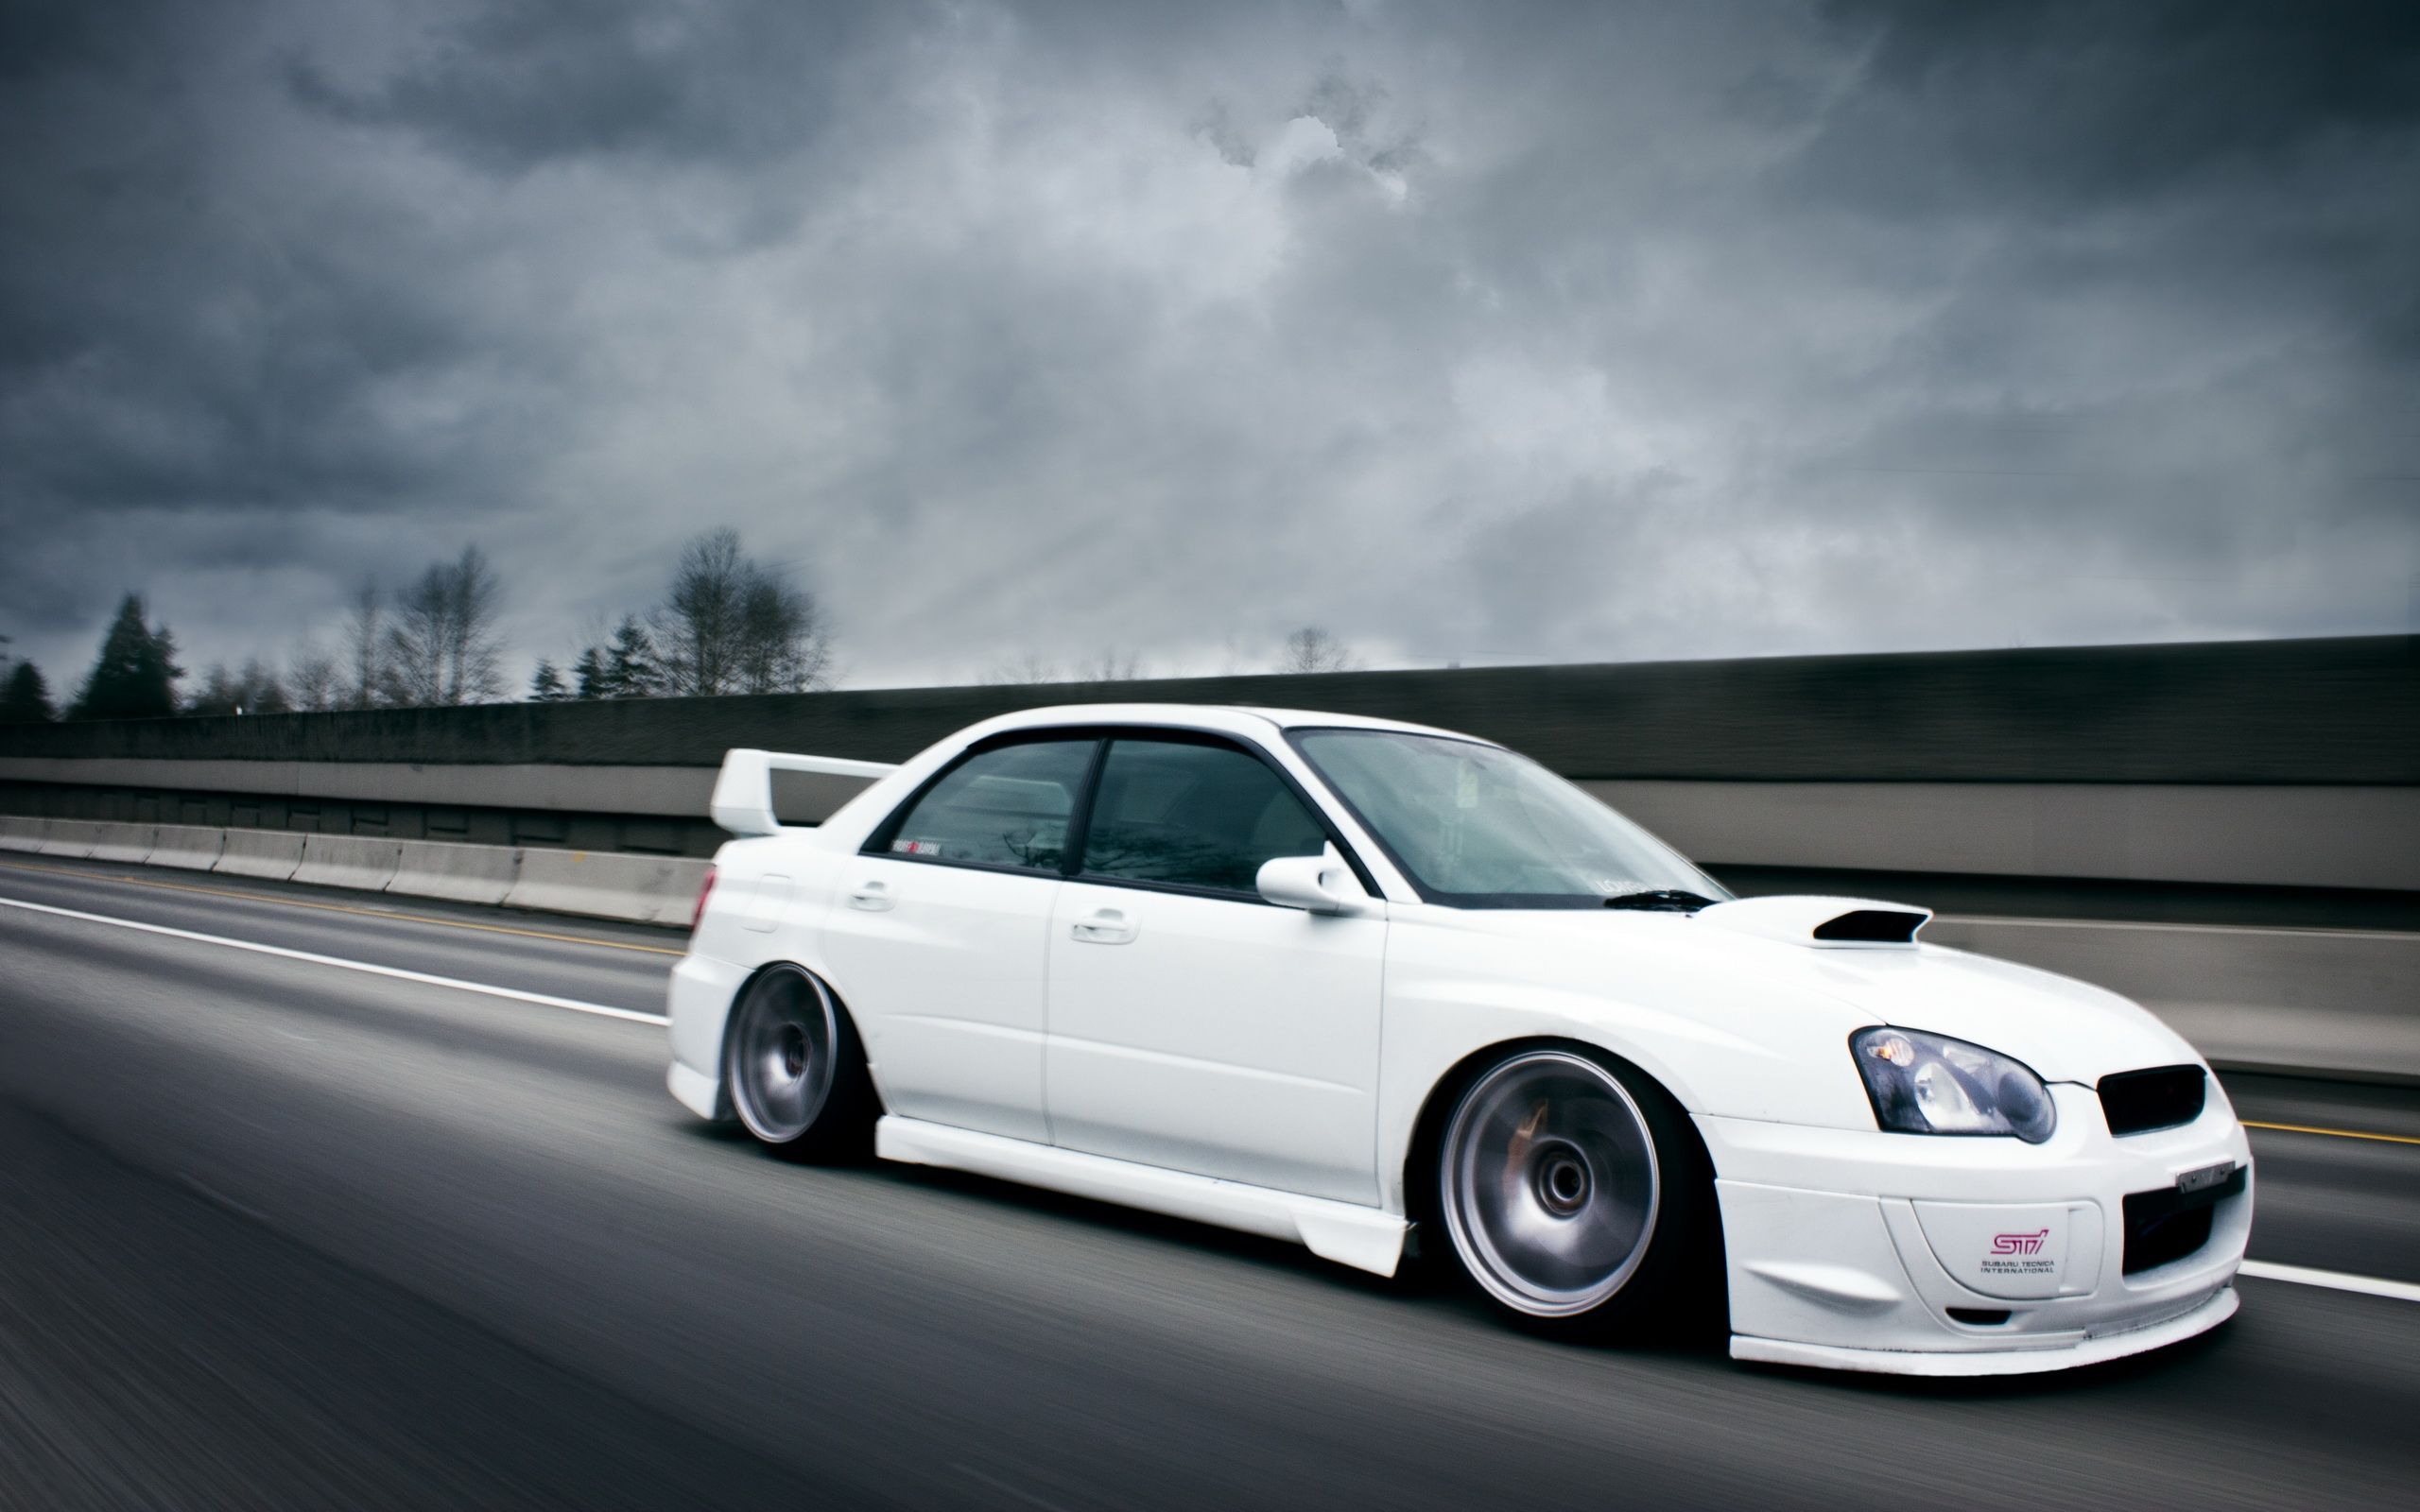 Subaru Impreza STI wallpapers and images - wallpapers, pictures ...